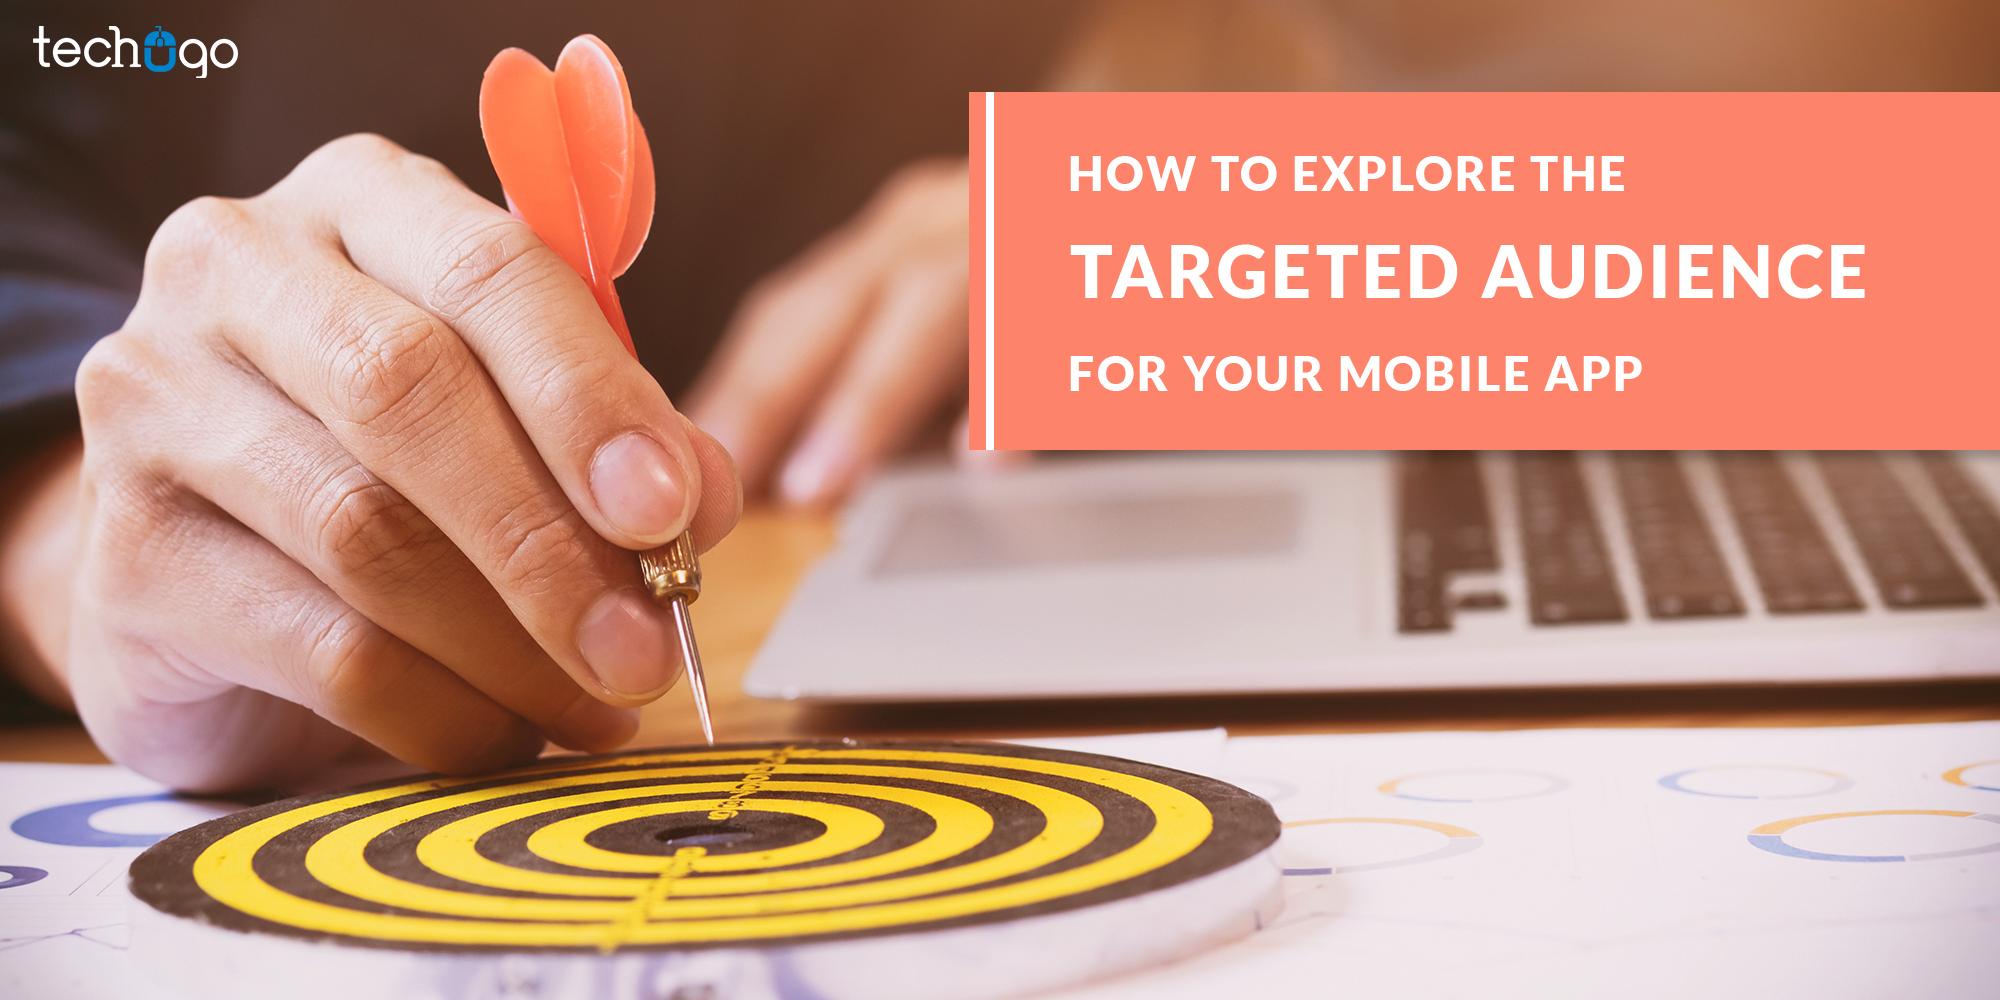 How To Explore The Targeted Audience For Your Mobile App